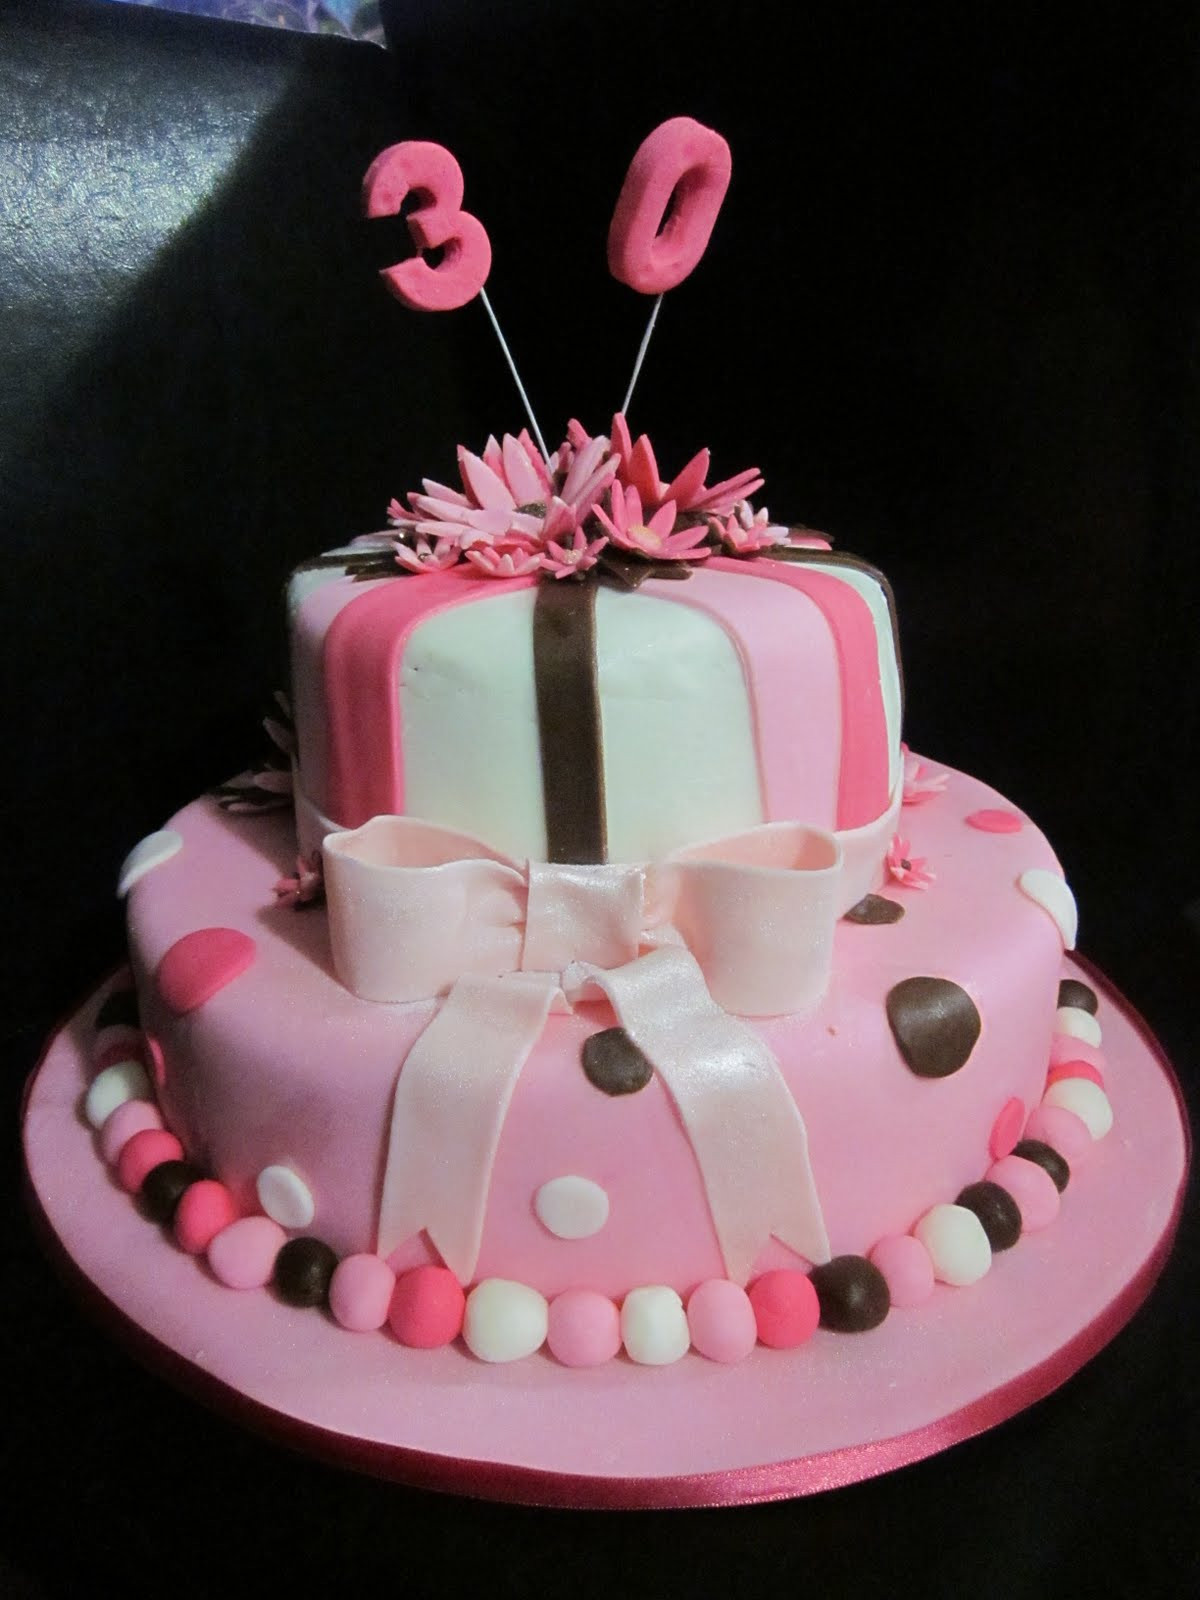 30th Birthday Cake Ideas For Her
 Deb s Cakes and Cupcakes Females 30th Birthday Cake